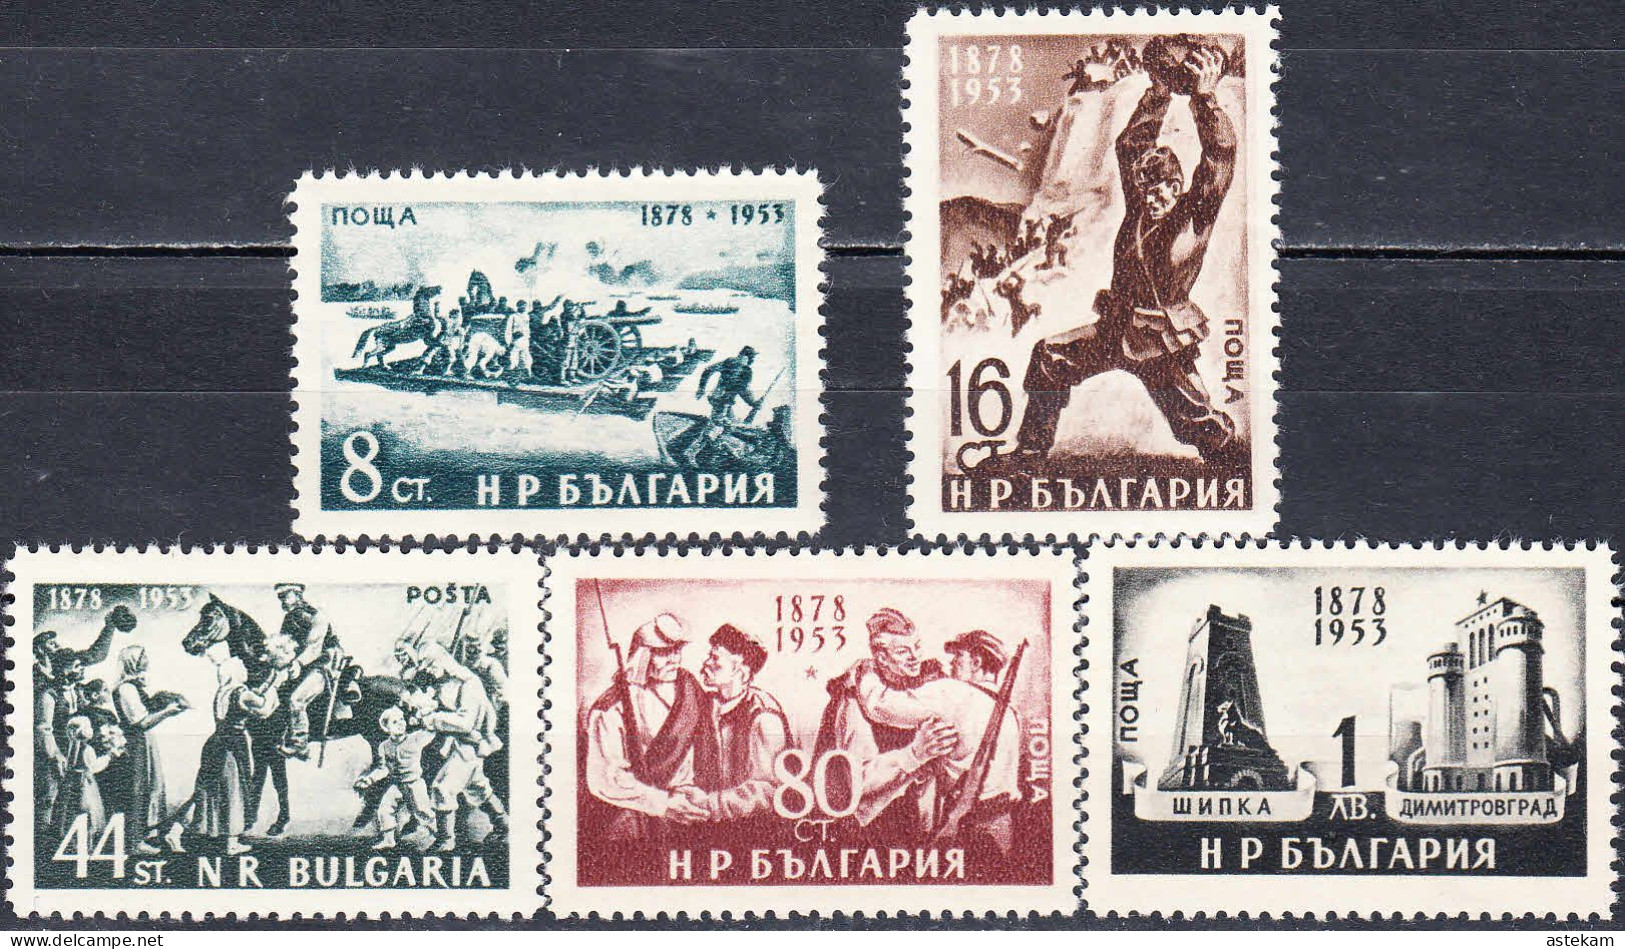 BULGARIA 1953, 75 YEARS Since LIBERATION Of TURKISH SLAVERY, COMPLETE, MNH SERIES With GOOD QUALITY, *** - Nuovi